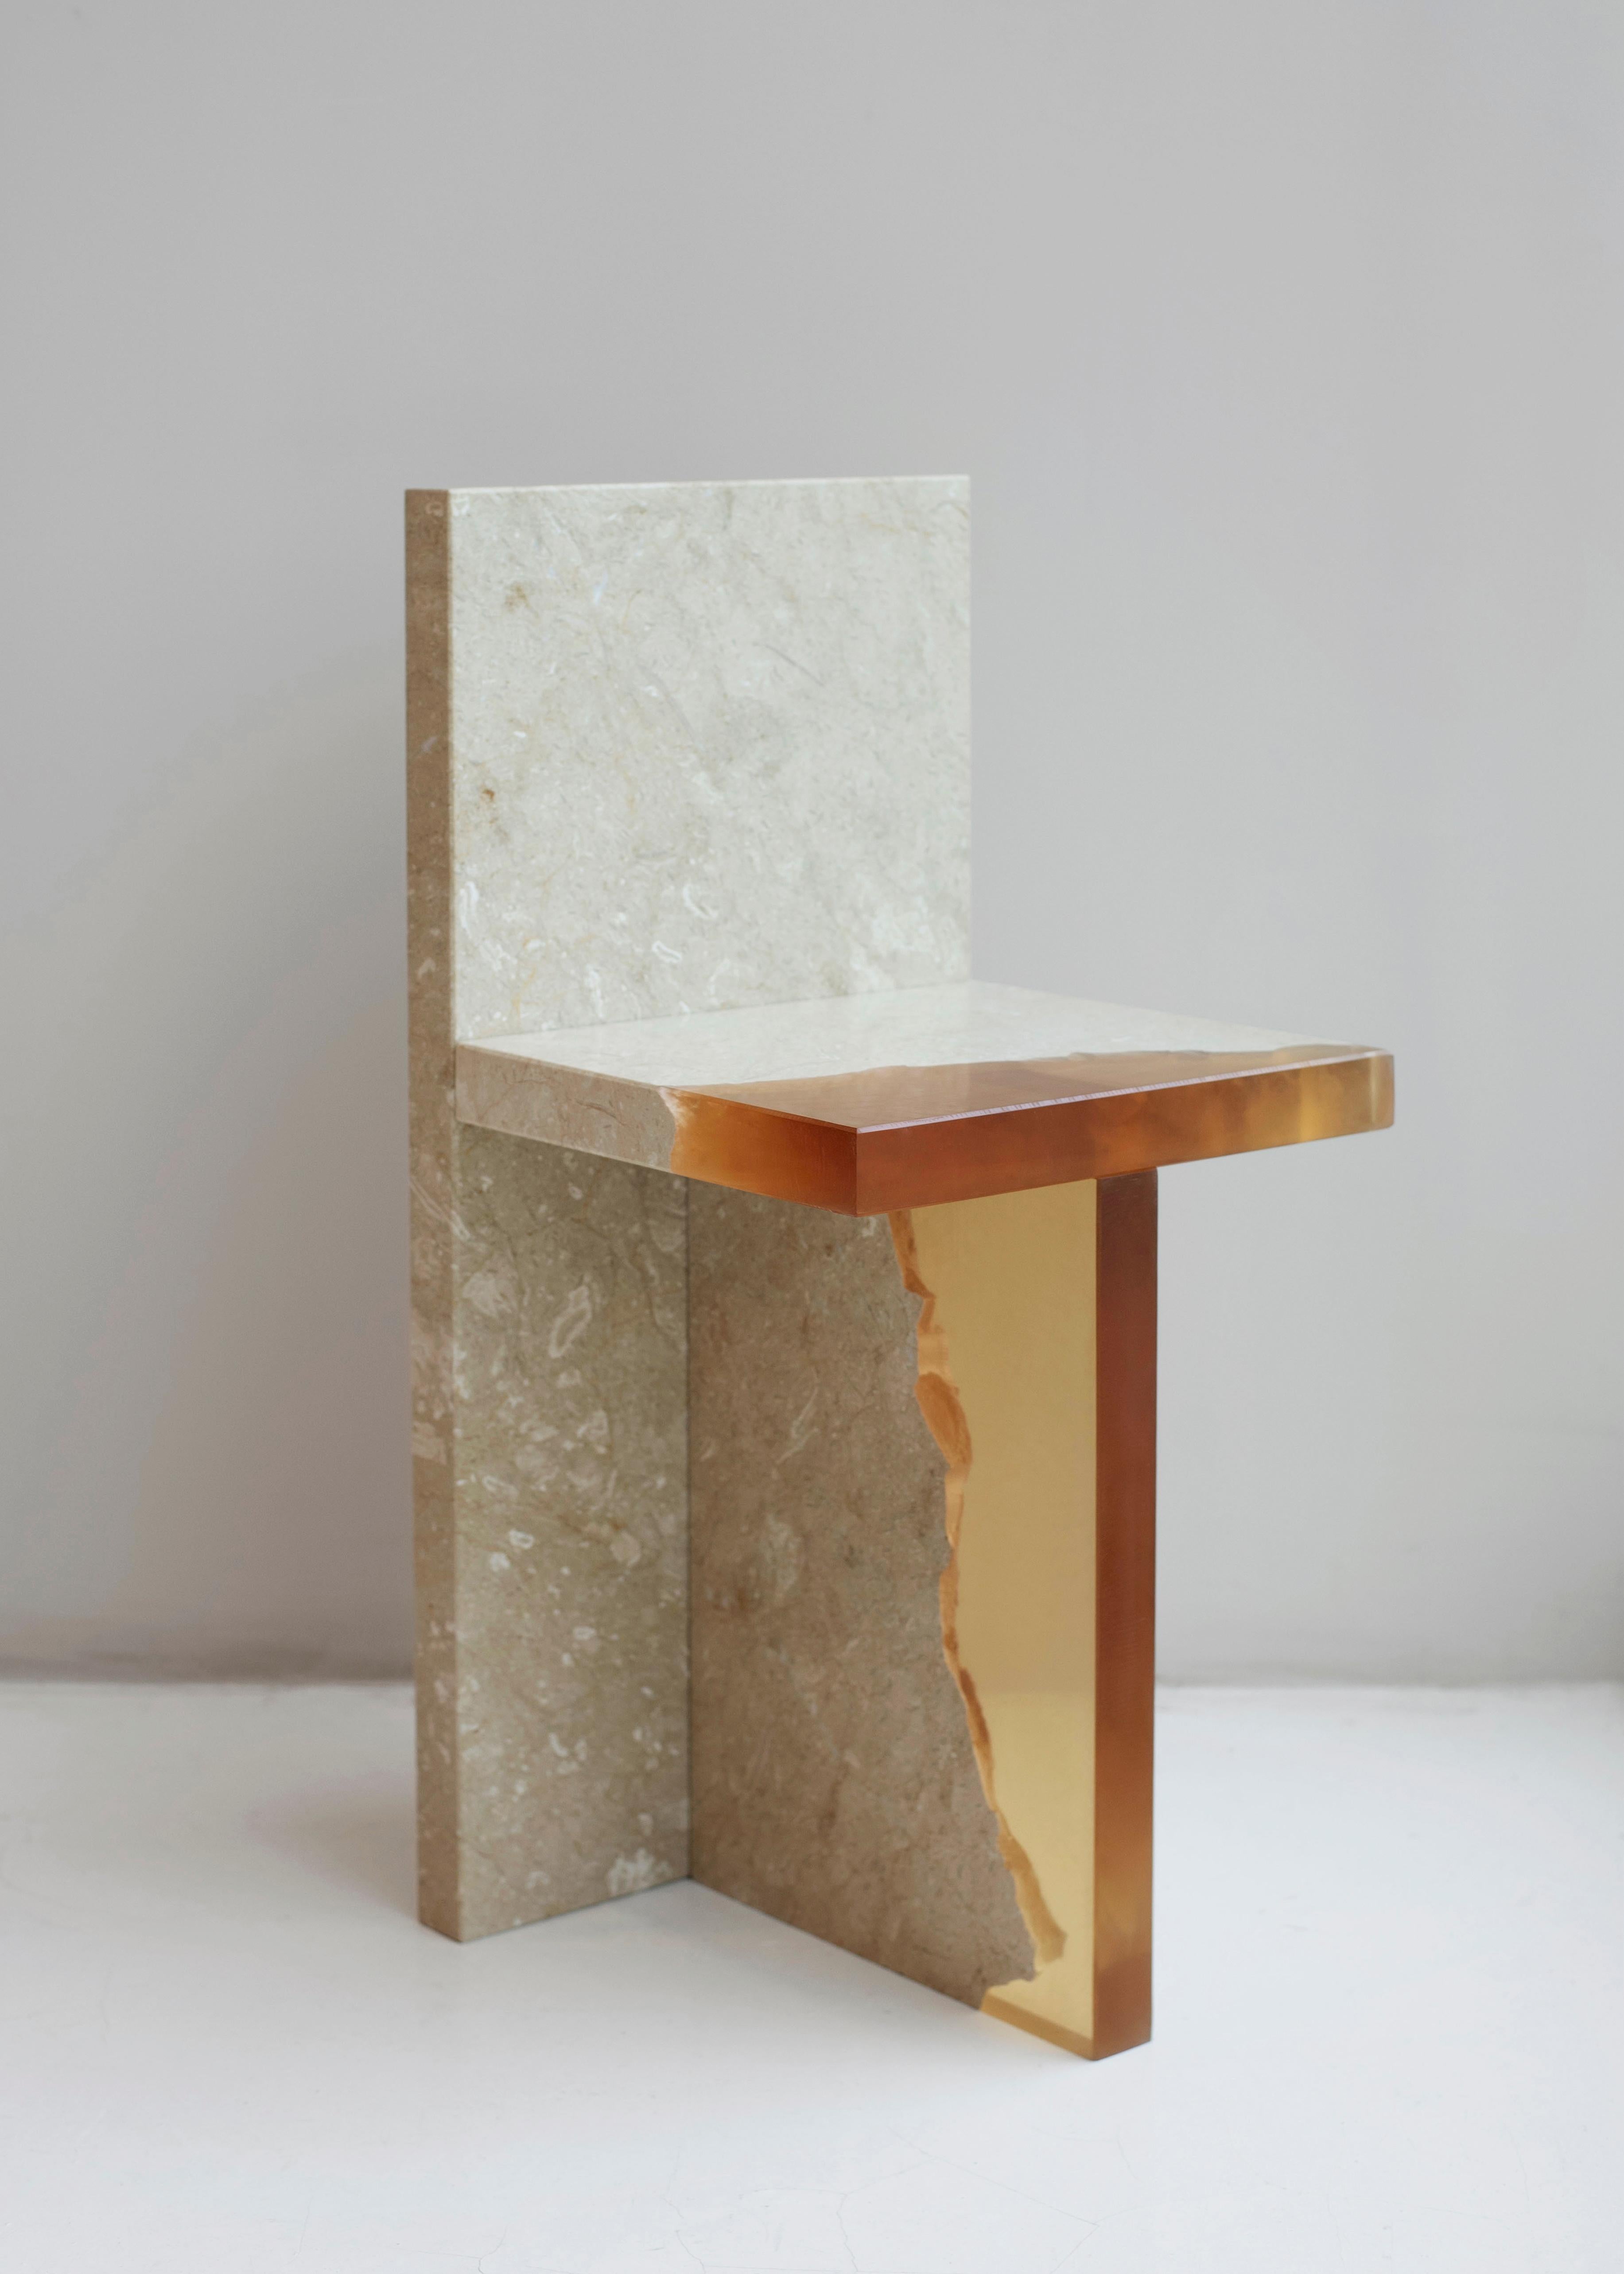 Organic Modern Crystal Resin and Marble, Fragment Chair, Jang Hea Kyoung